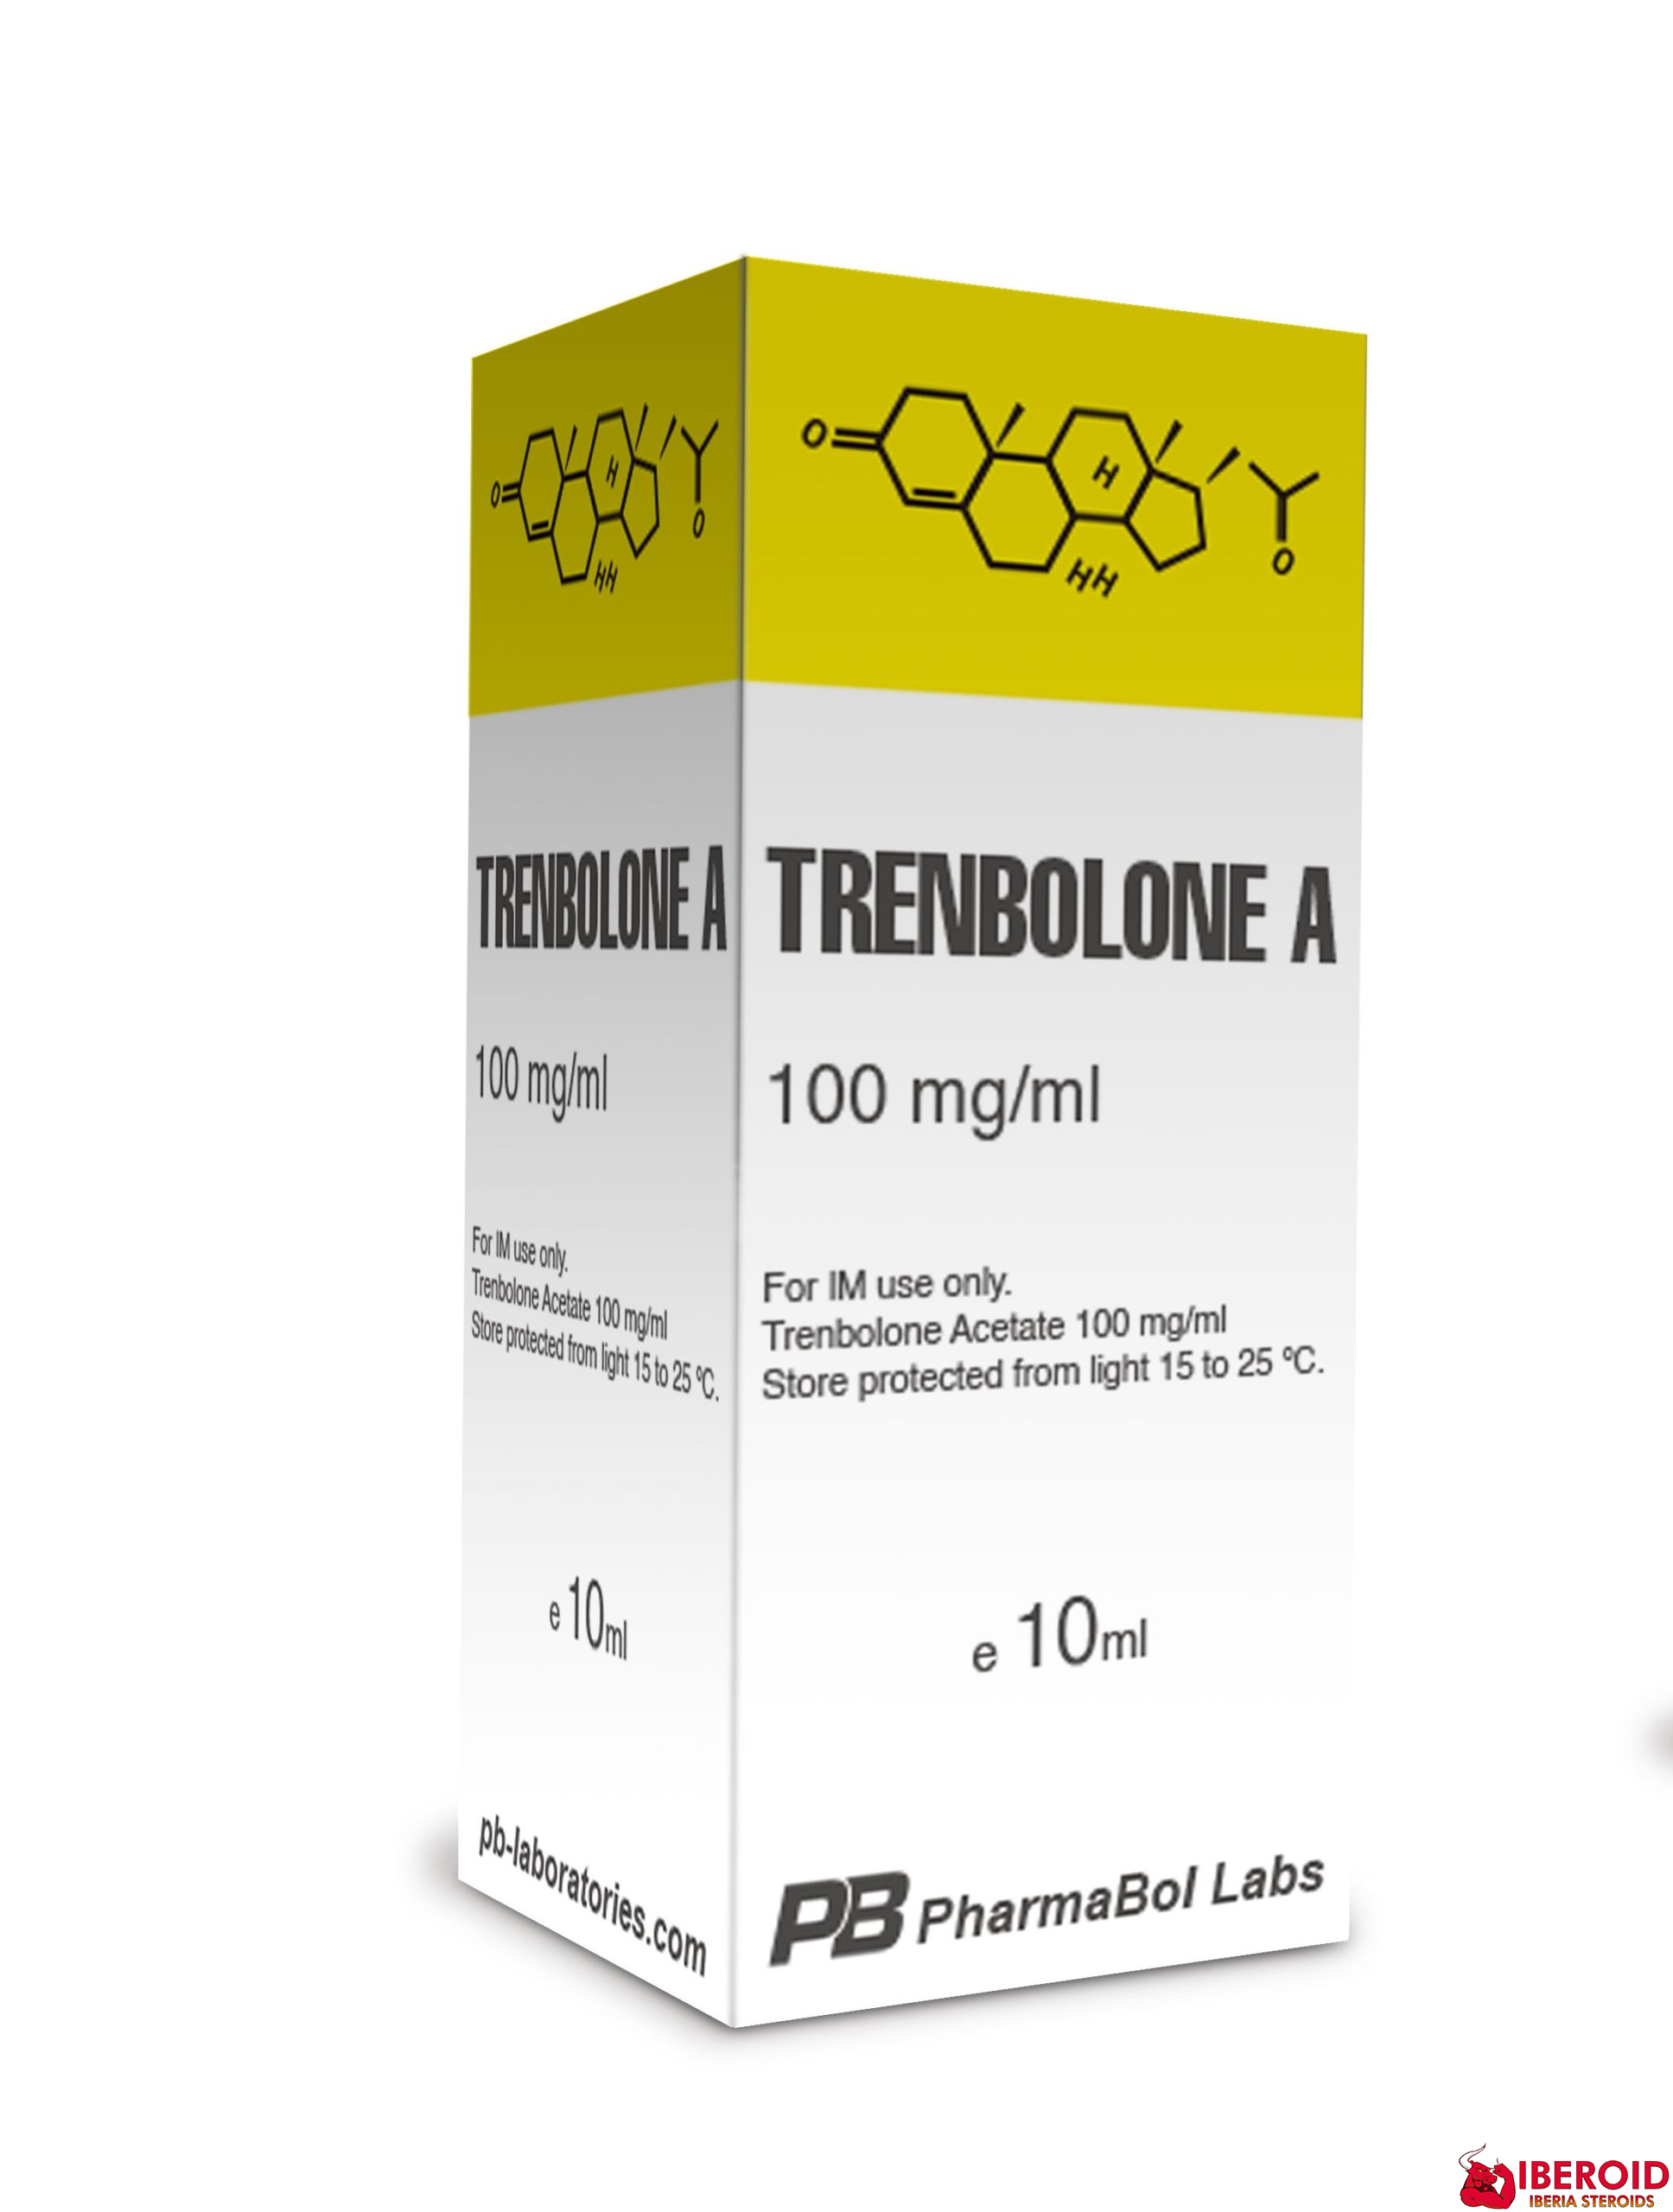 10 Effective Ways To Get More Out Of clenbuterol euro pharmacies